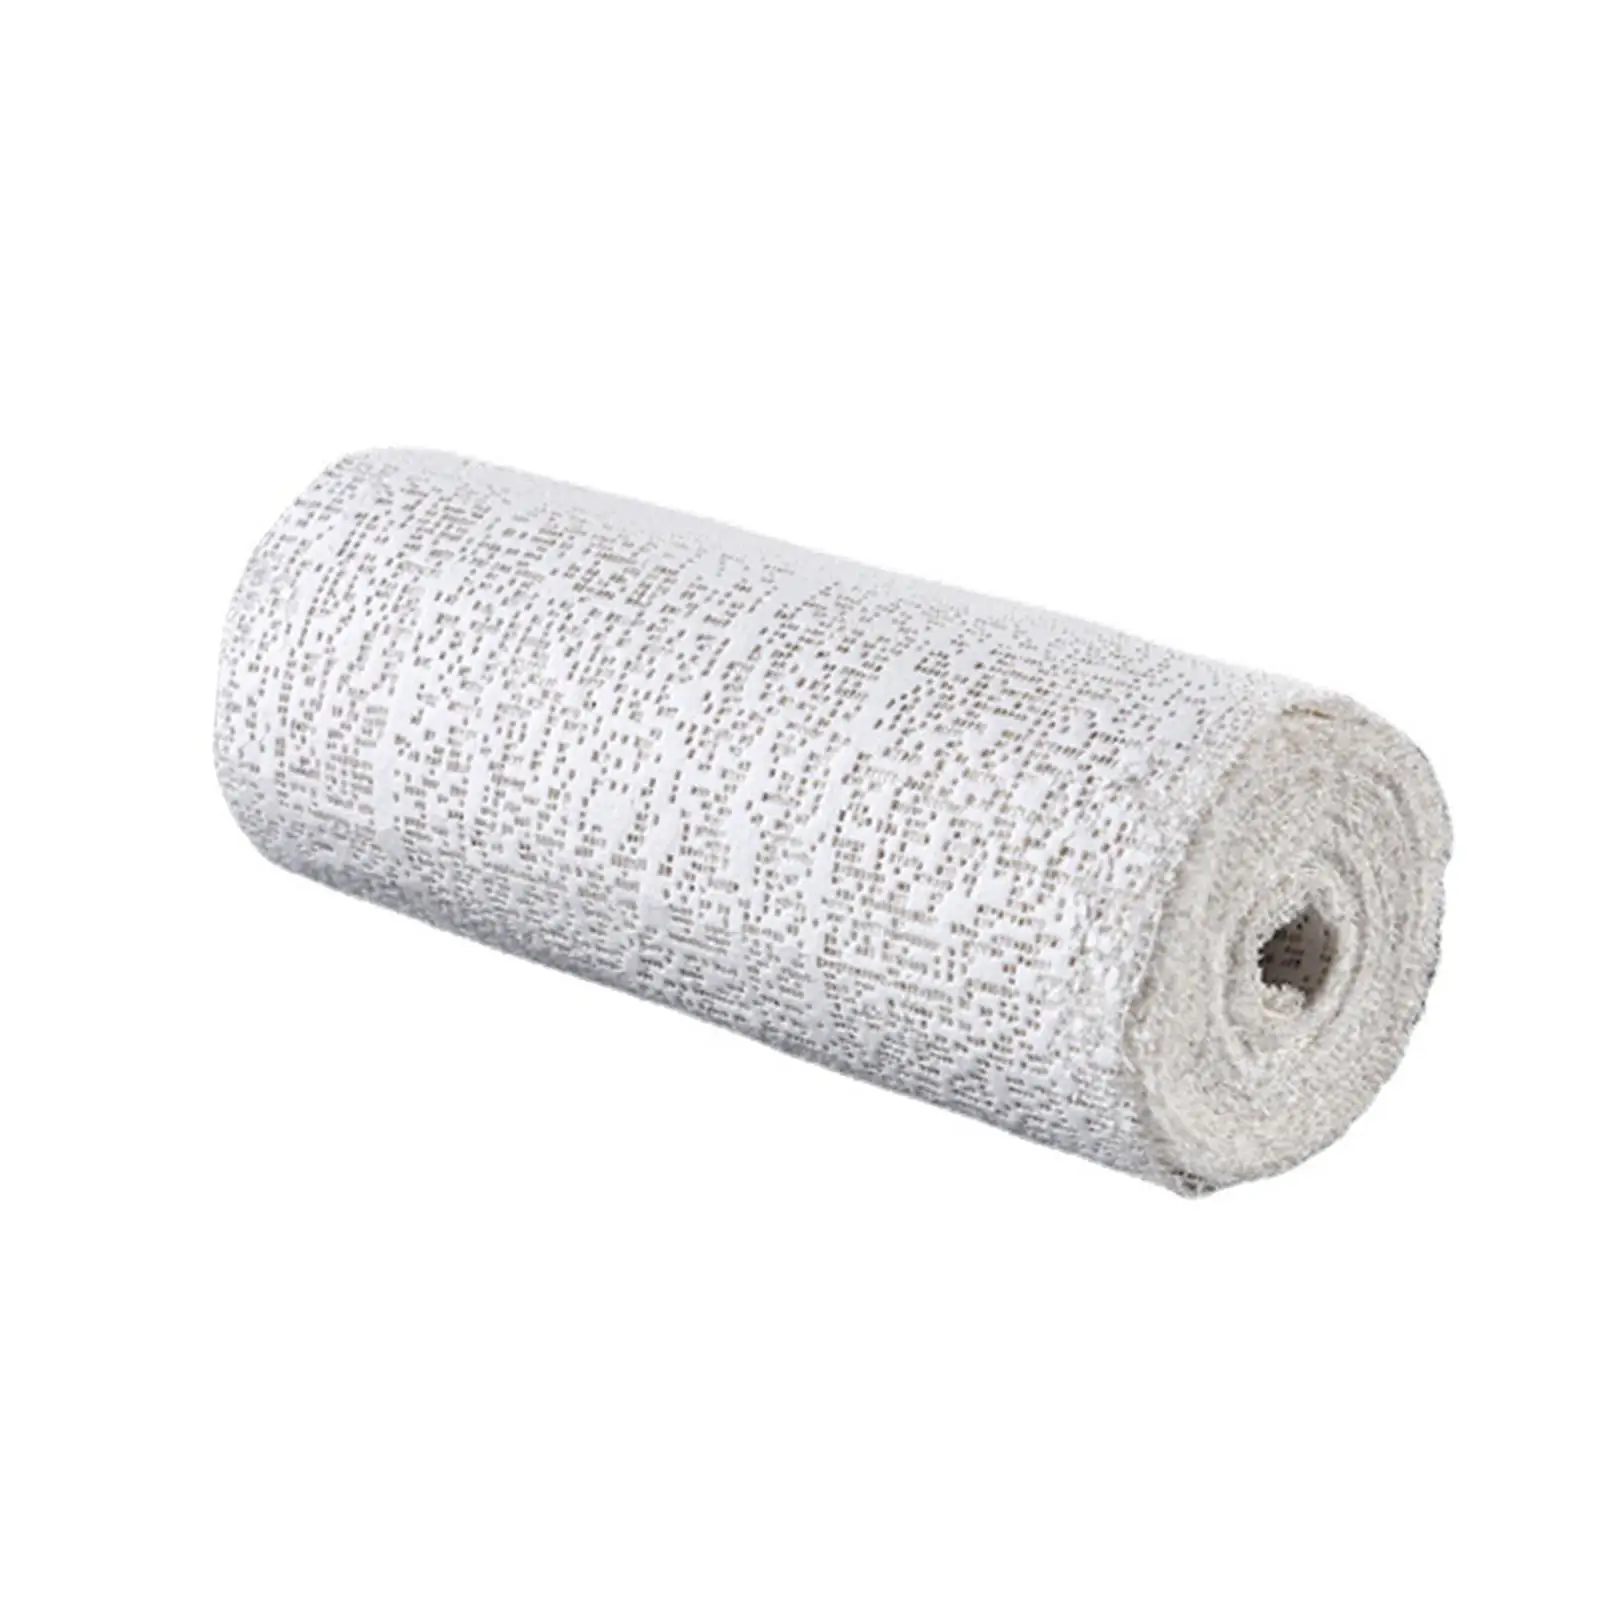 

Plaster Cloth Gauze Tape Bandages Strips Cast Material Wrap for Modelling Crafting Scenery Model Trains Casting